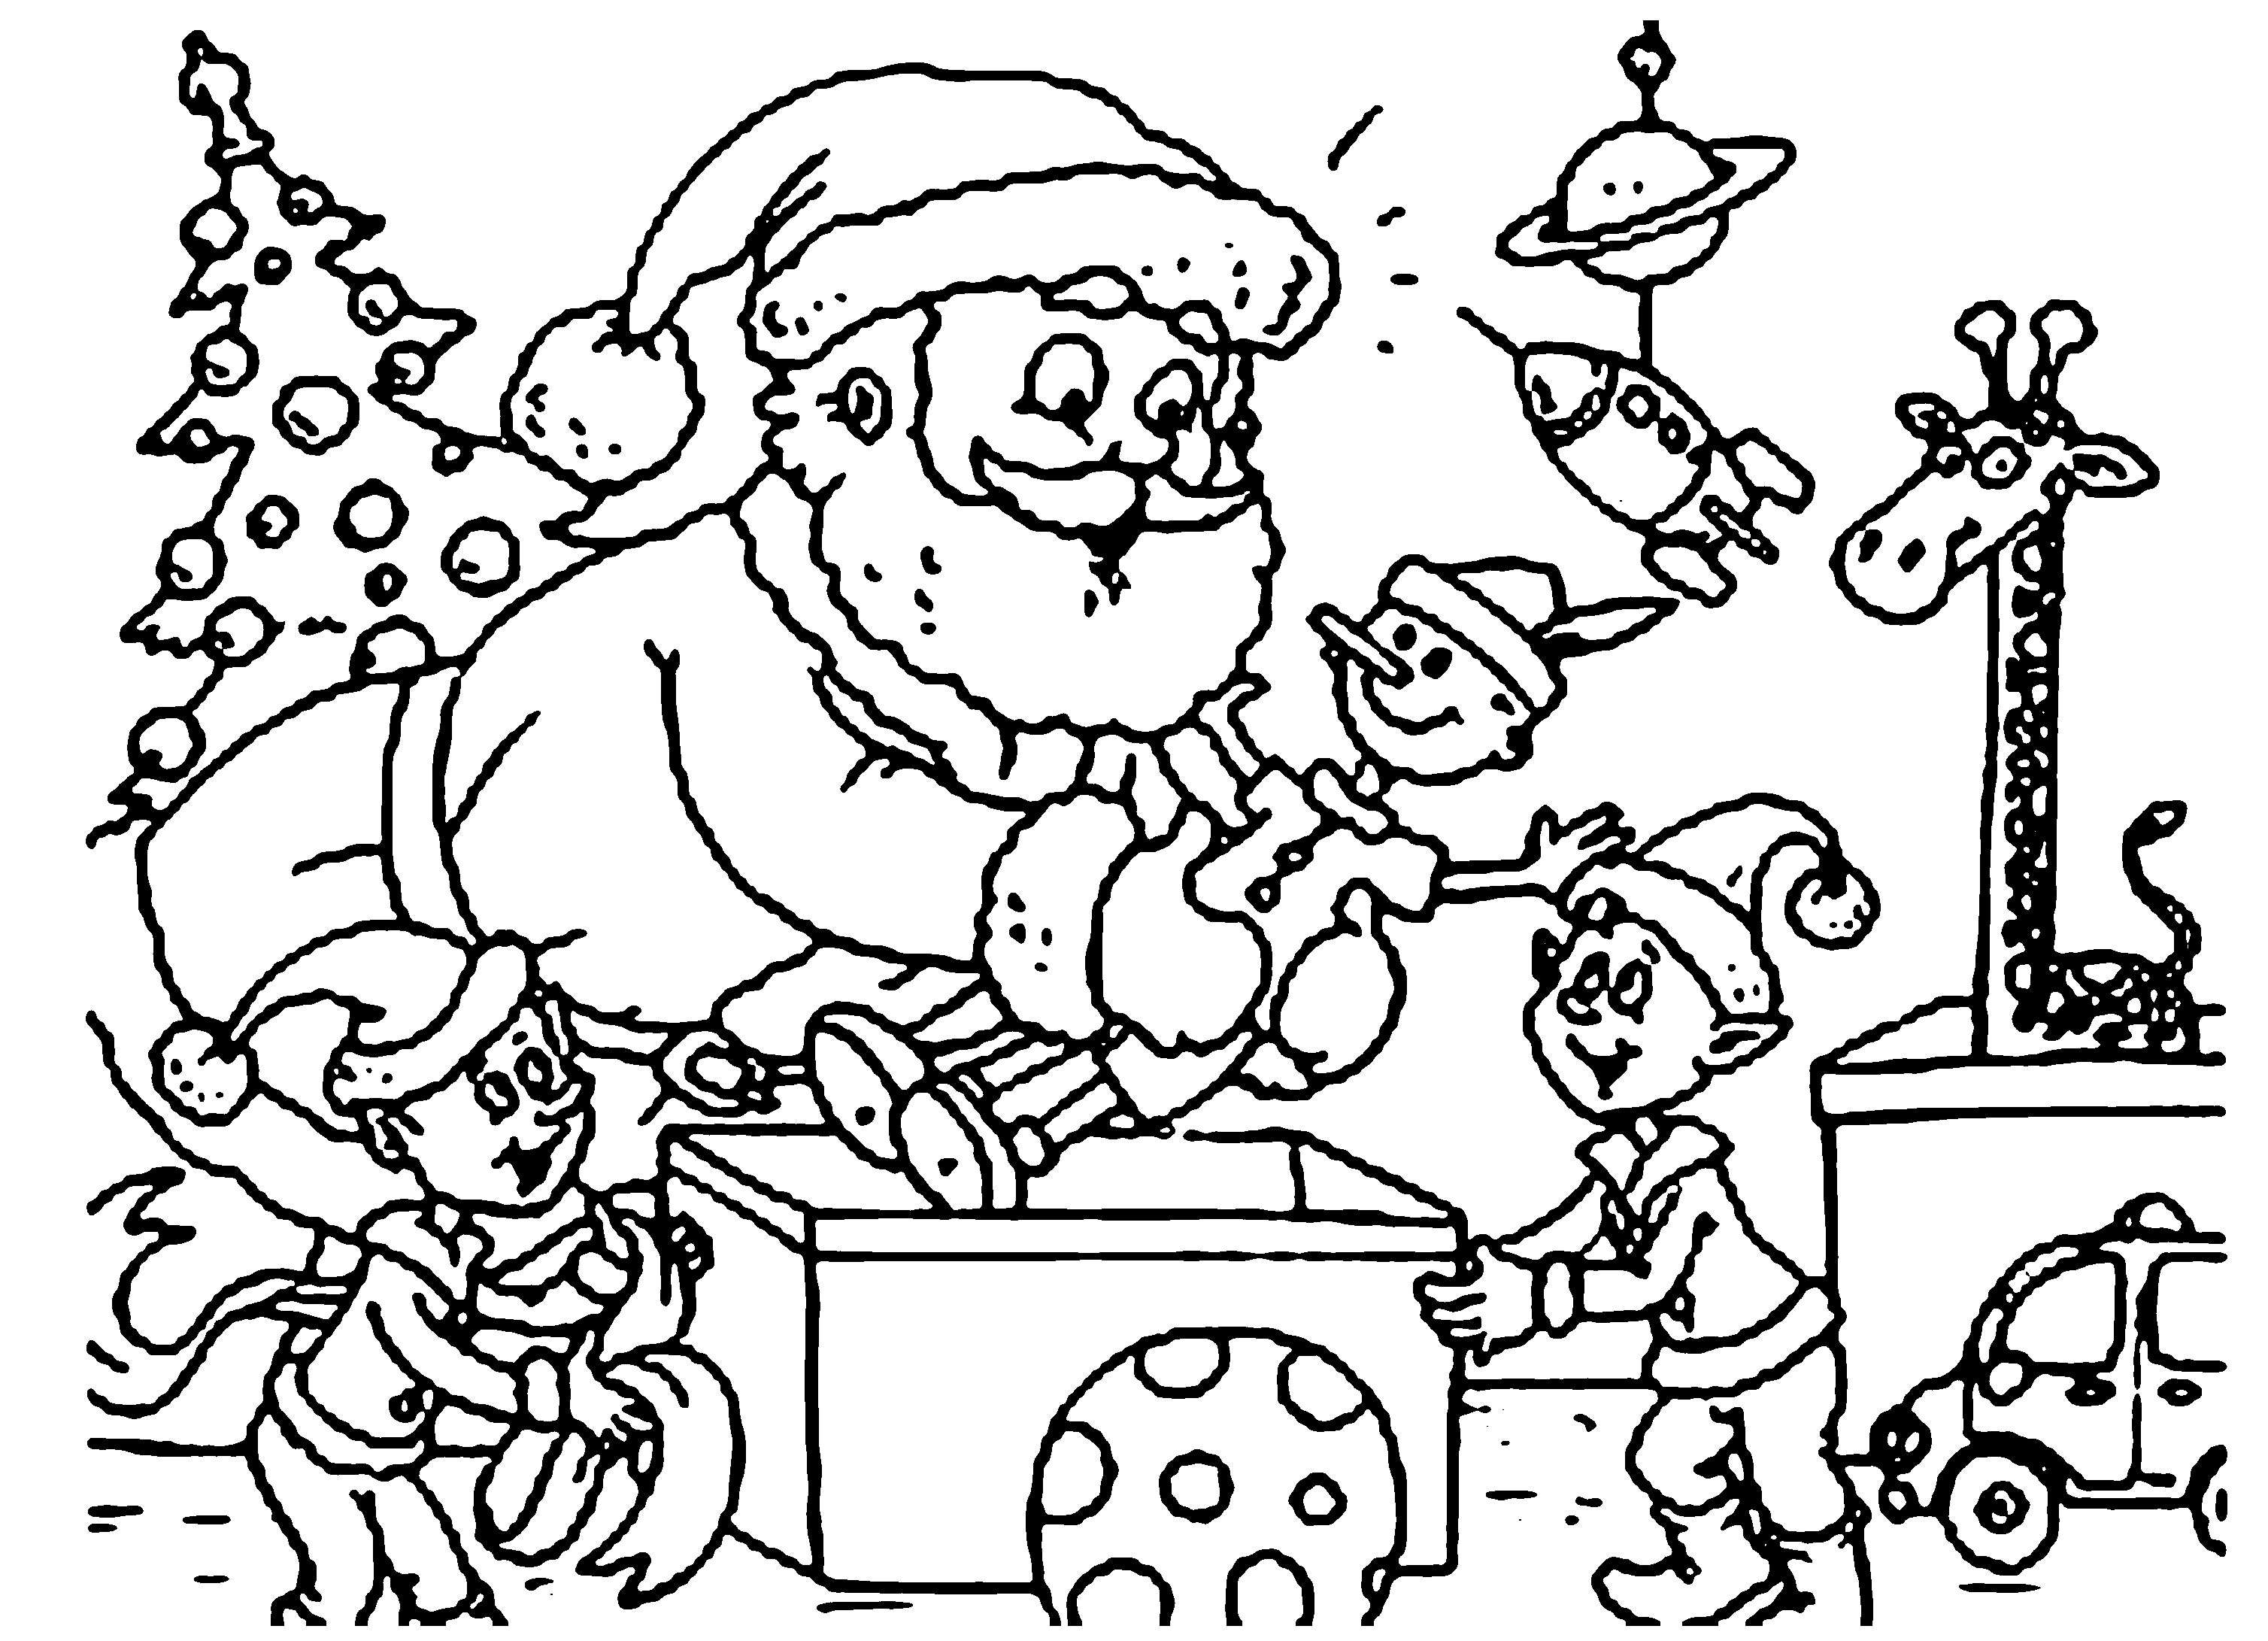 Coloring Pages Christmas Free Printable | Free Coloring Pages